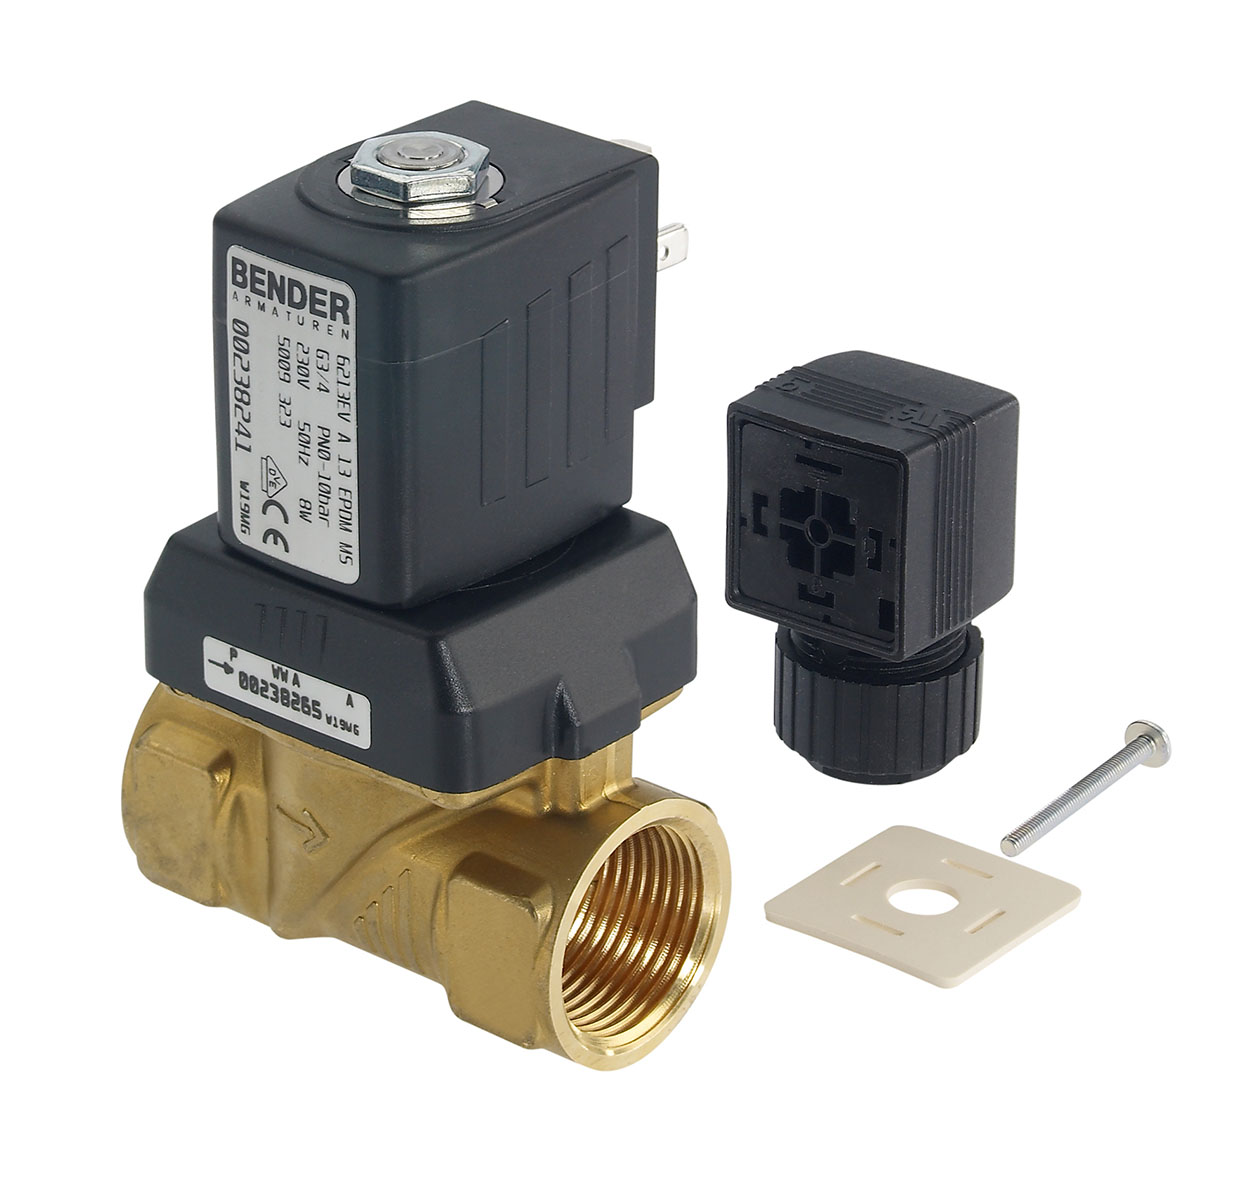 5009335 - 2/2 way solenoidvalve normally closed for fluids Type 1; female thread